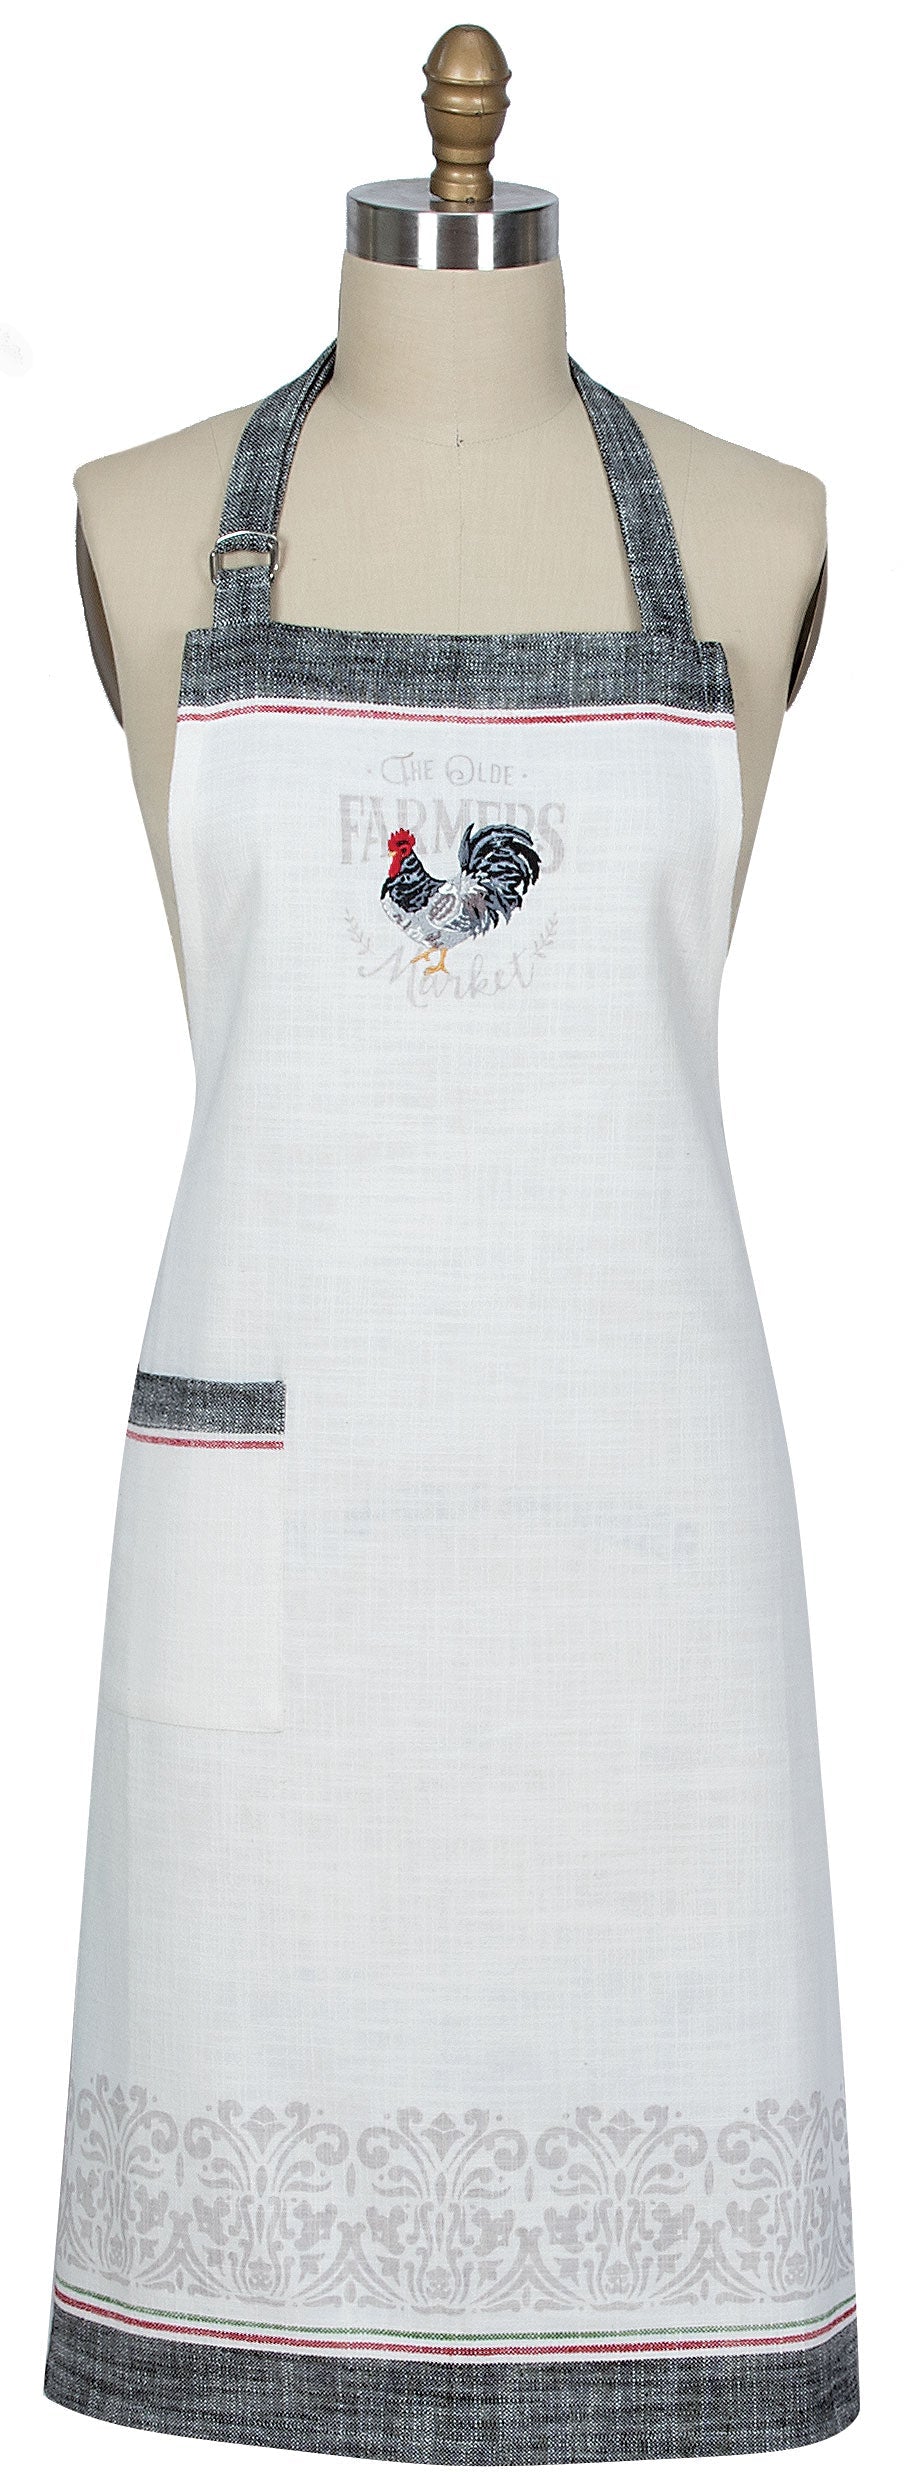 Farmers Market Embroidered Apron